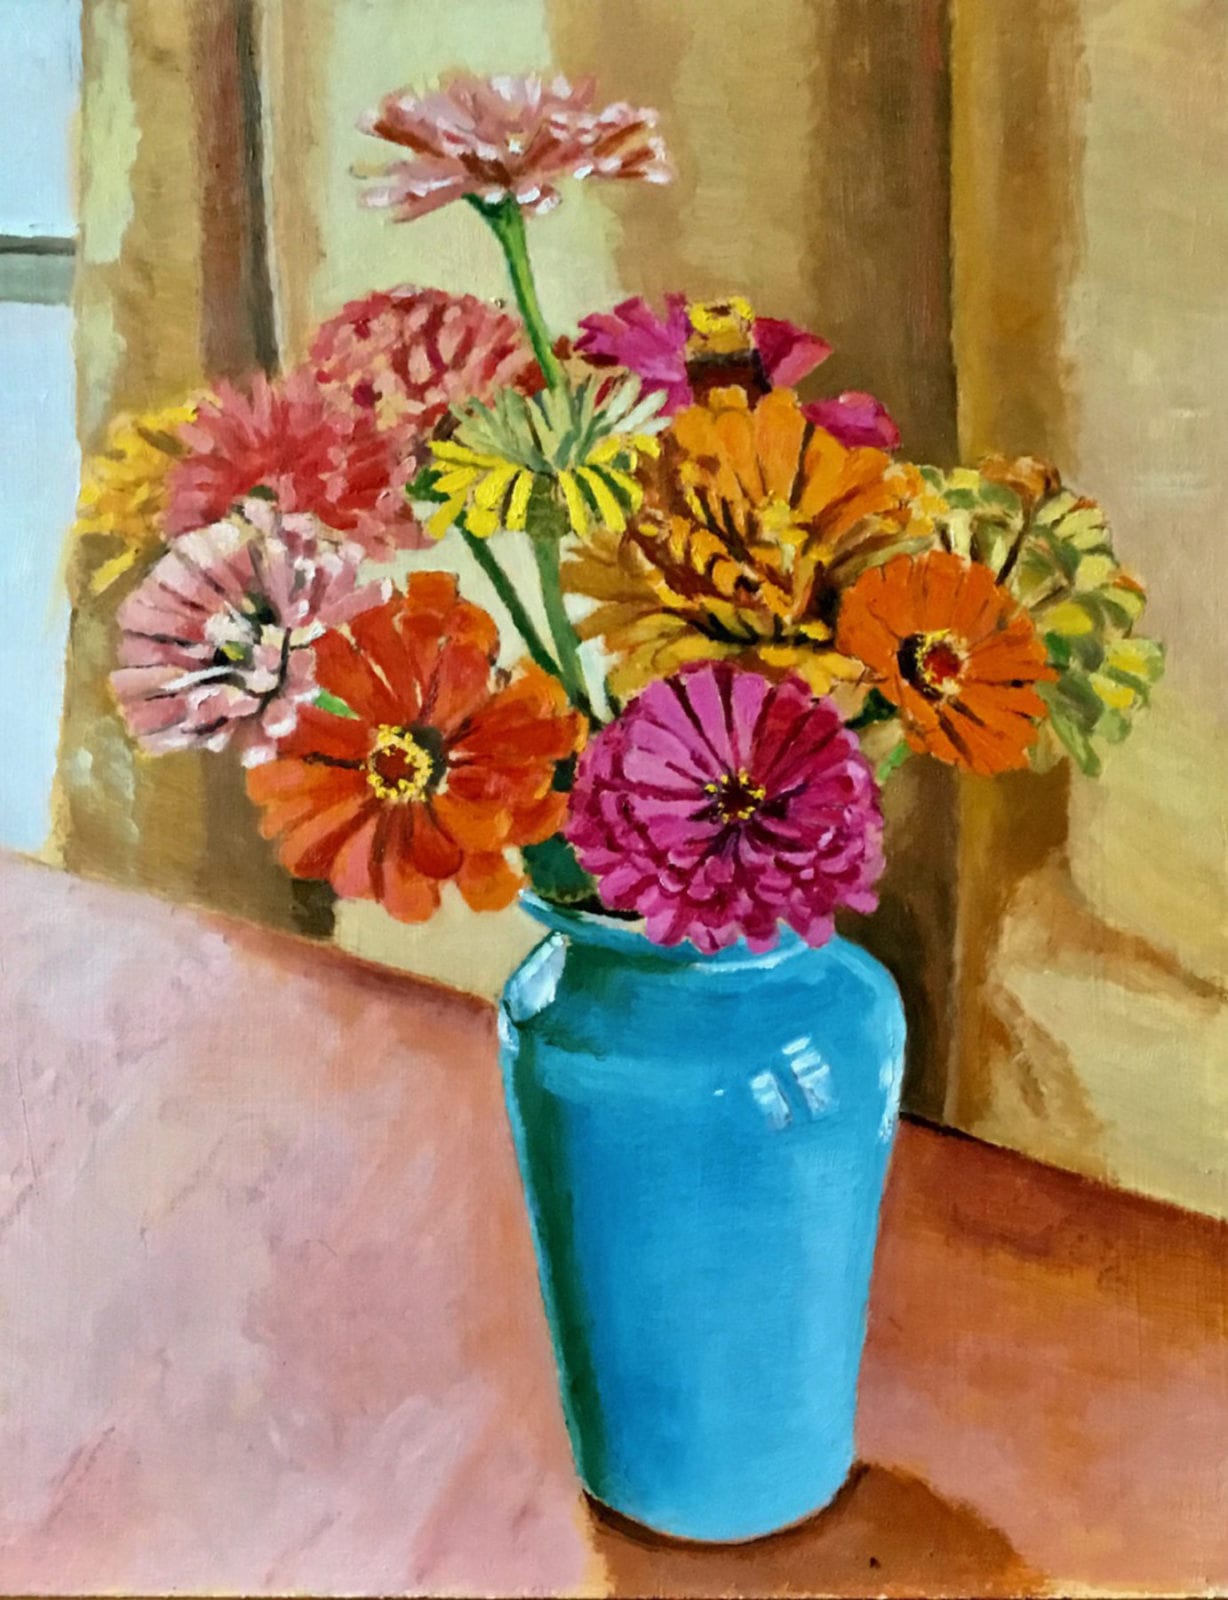 Michael Graham, Zinnias in a Blue Vase, oil on wood panel, 15 x 20 inches